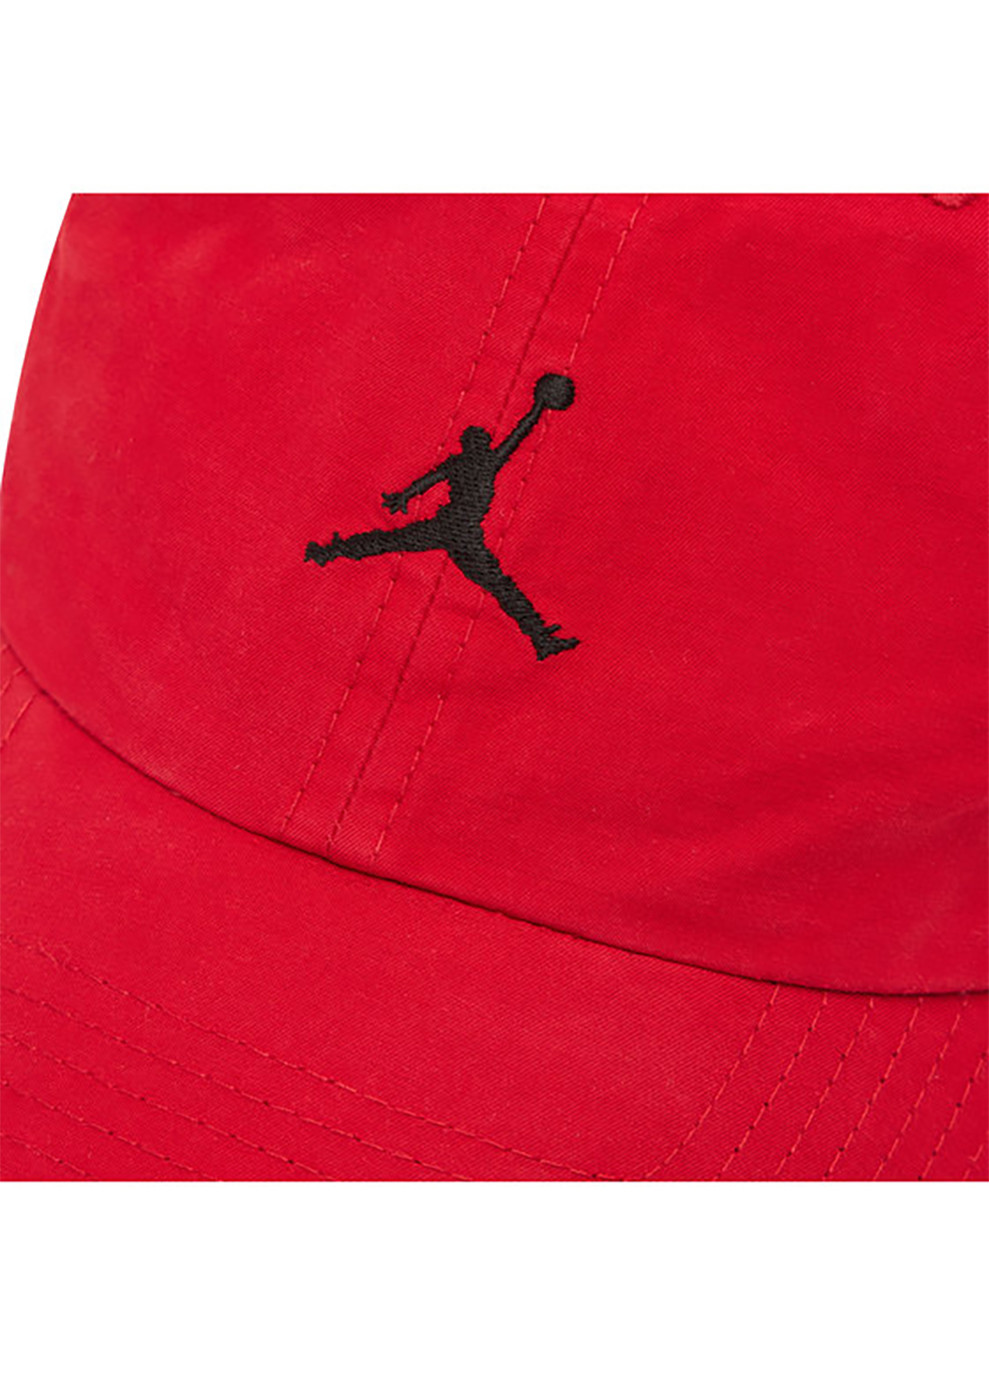 Кепка H86 Jumpman Washed Cap One Size red Jordan (258129447)